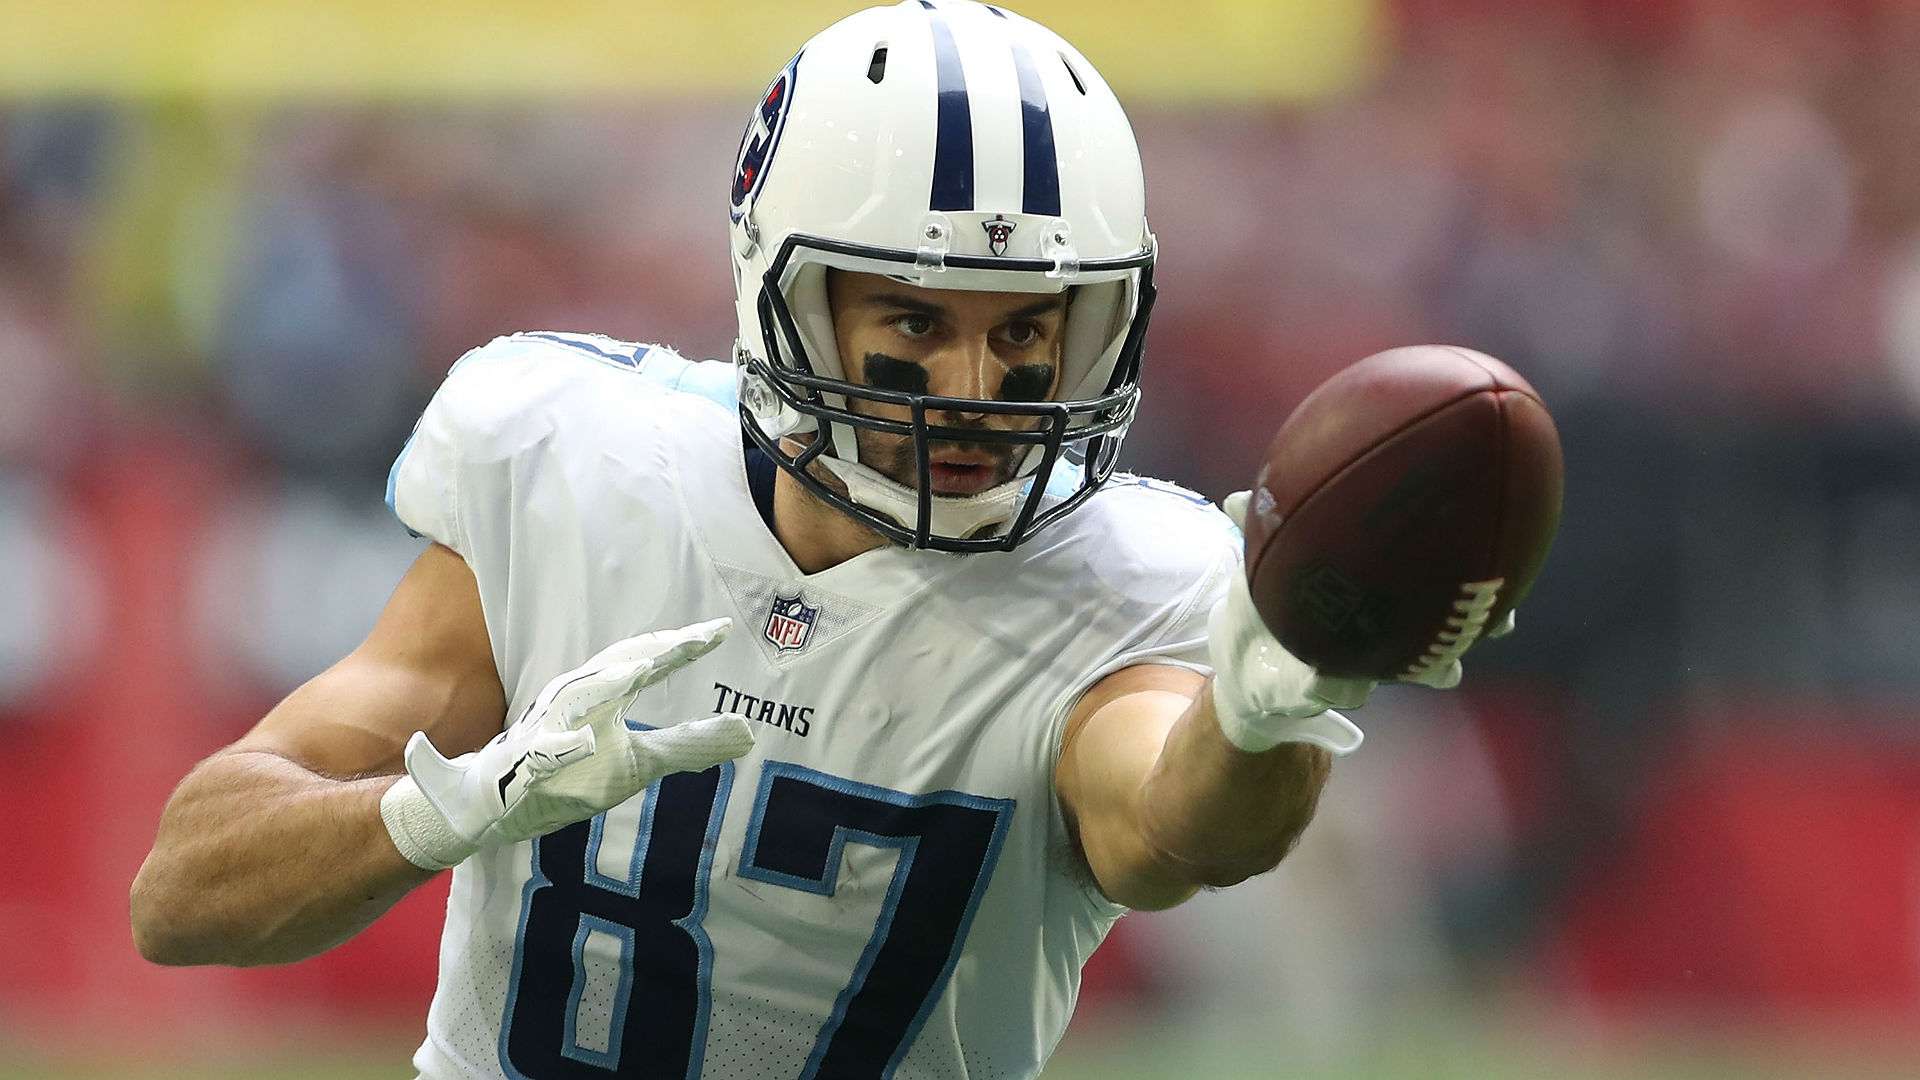 NFL free agency rumors: Patriots to sign Eric Decker to 1-year deal